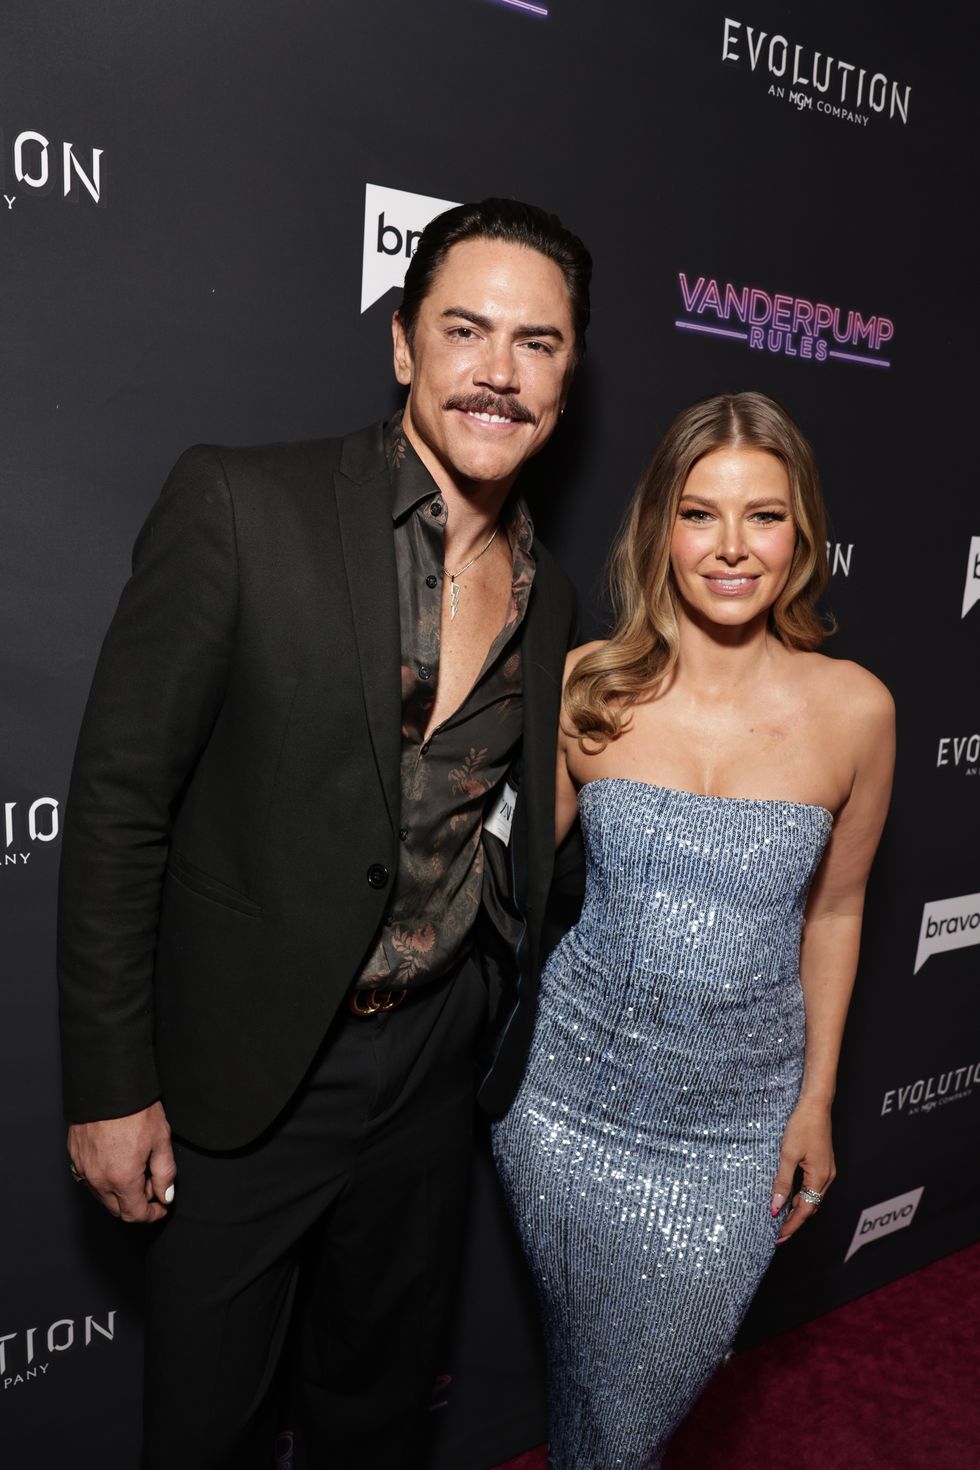 vanderpump rules season 10 premiere party pictured l r tom sandoval, ariana madix photo by todd williamsonbravo via getty images